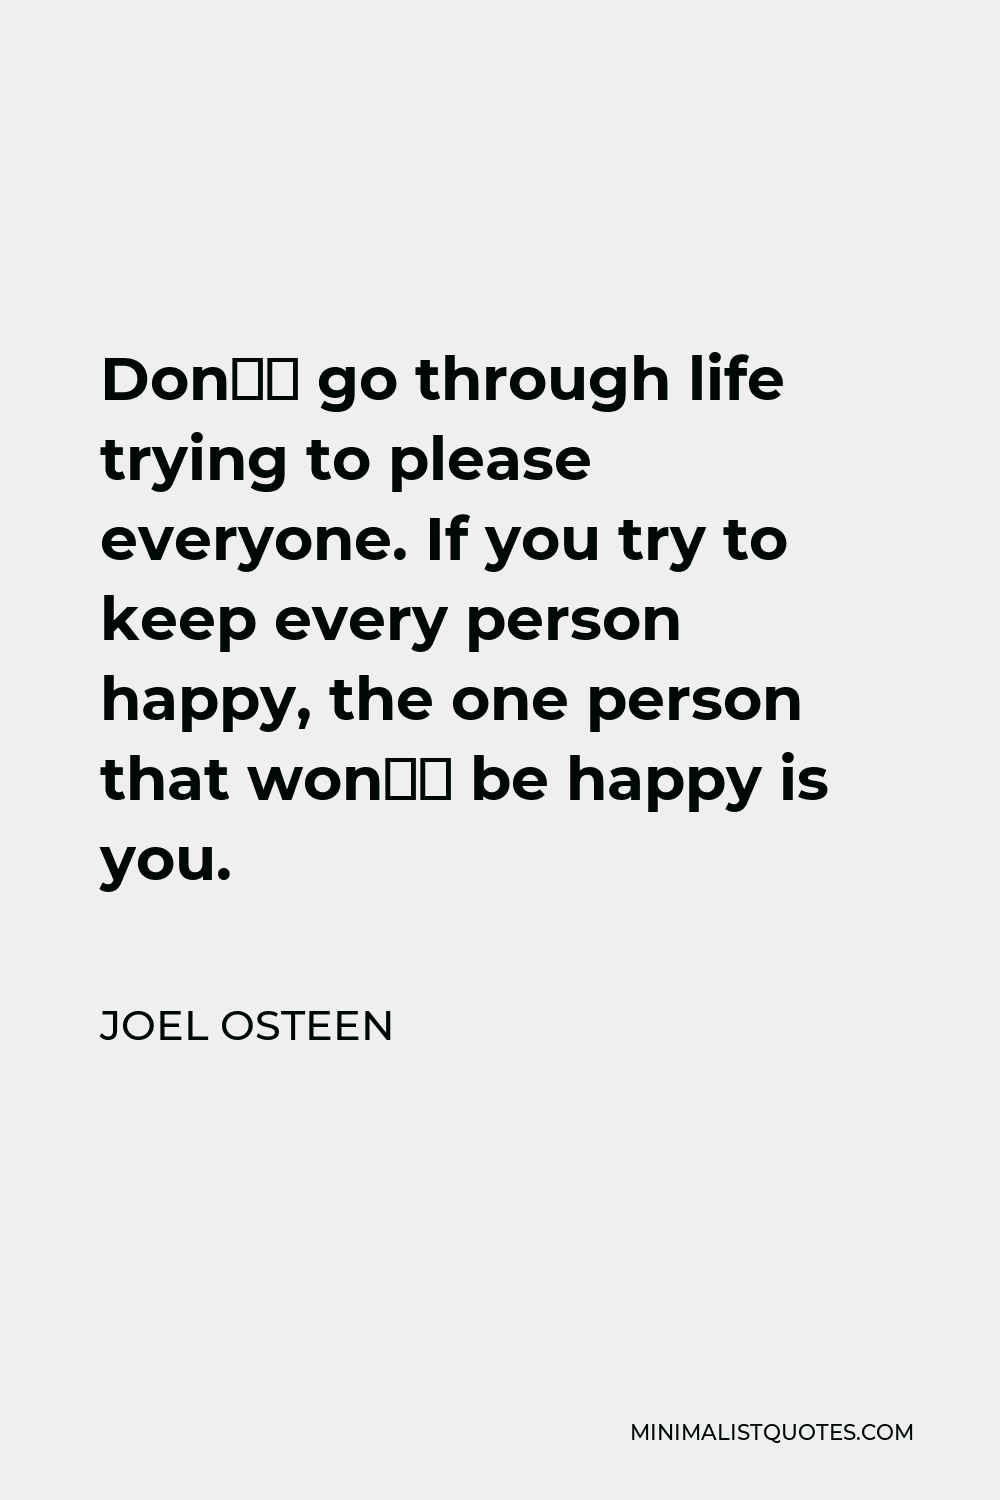 Joel Osteen Quote - Don’t go through life trying to please everyone. If you try to keep every person happy, the one person that won’t be happy is you.